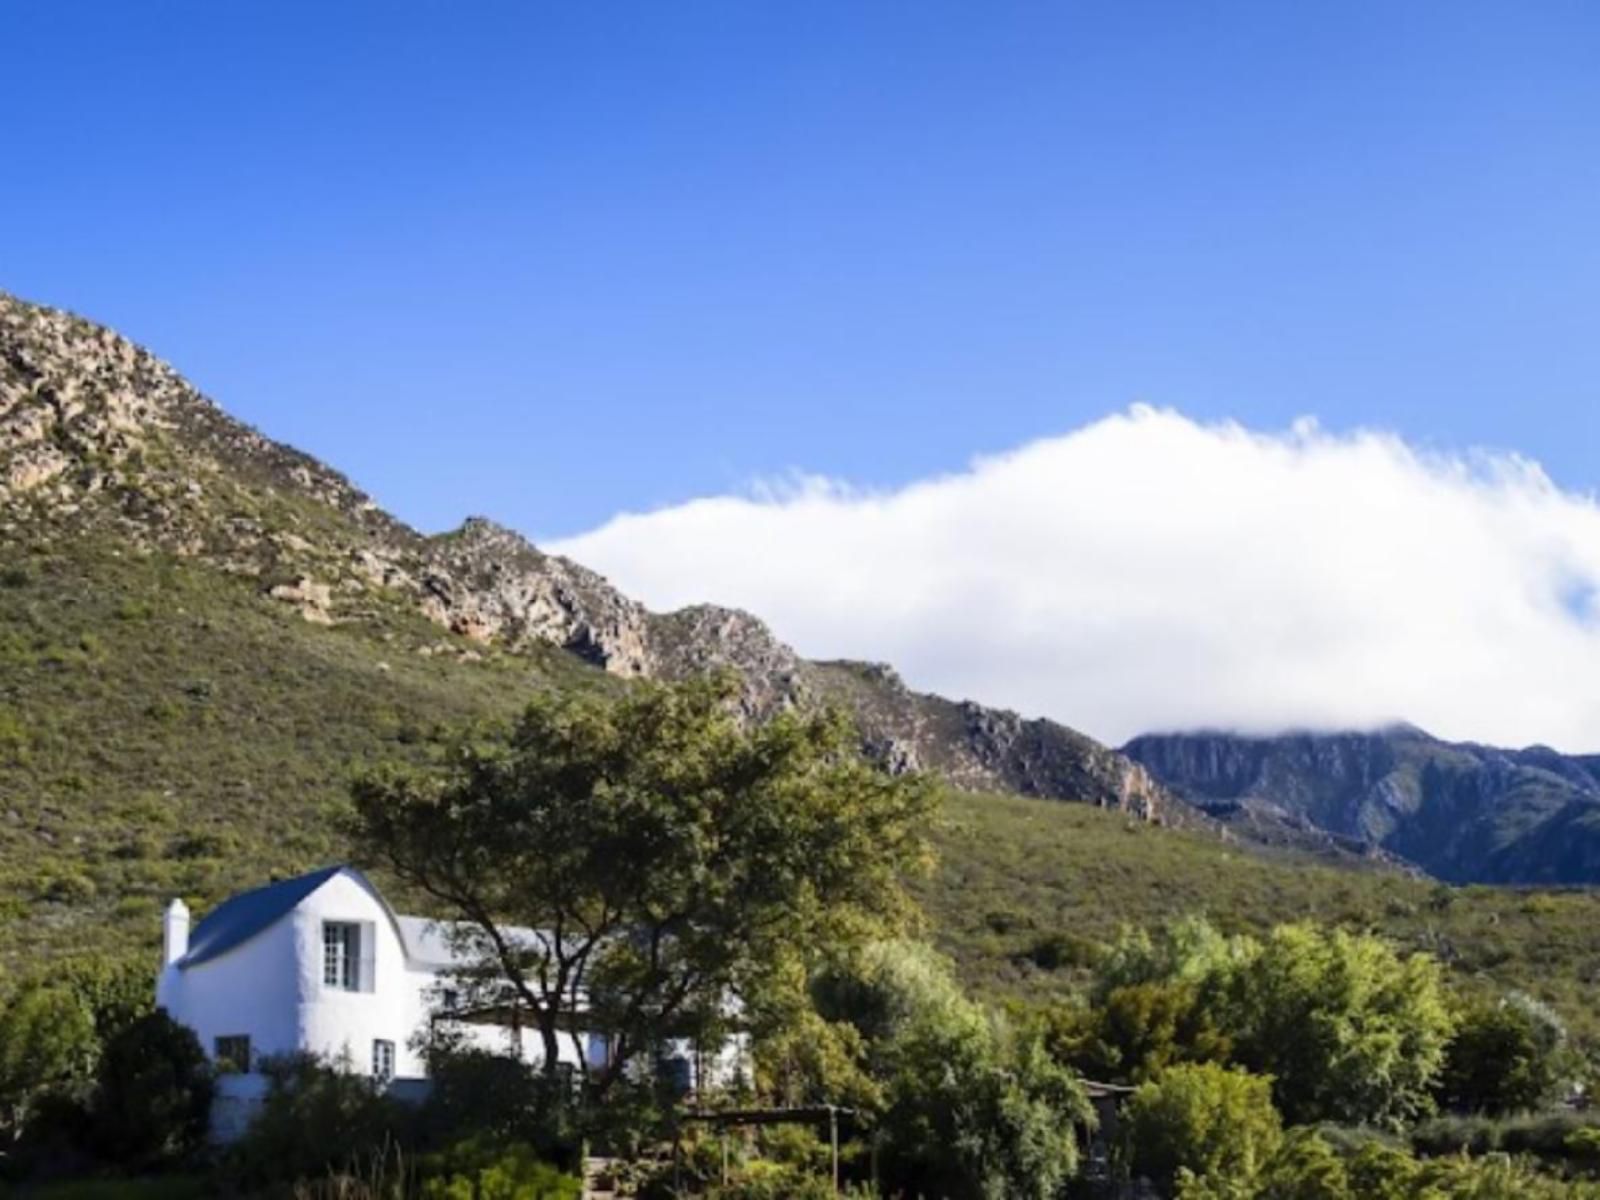 Kogman And Keisie Guest Farm Montagu Western Cape South Africa Mountain, Nature